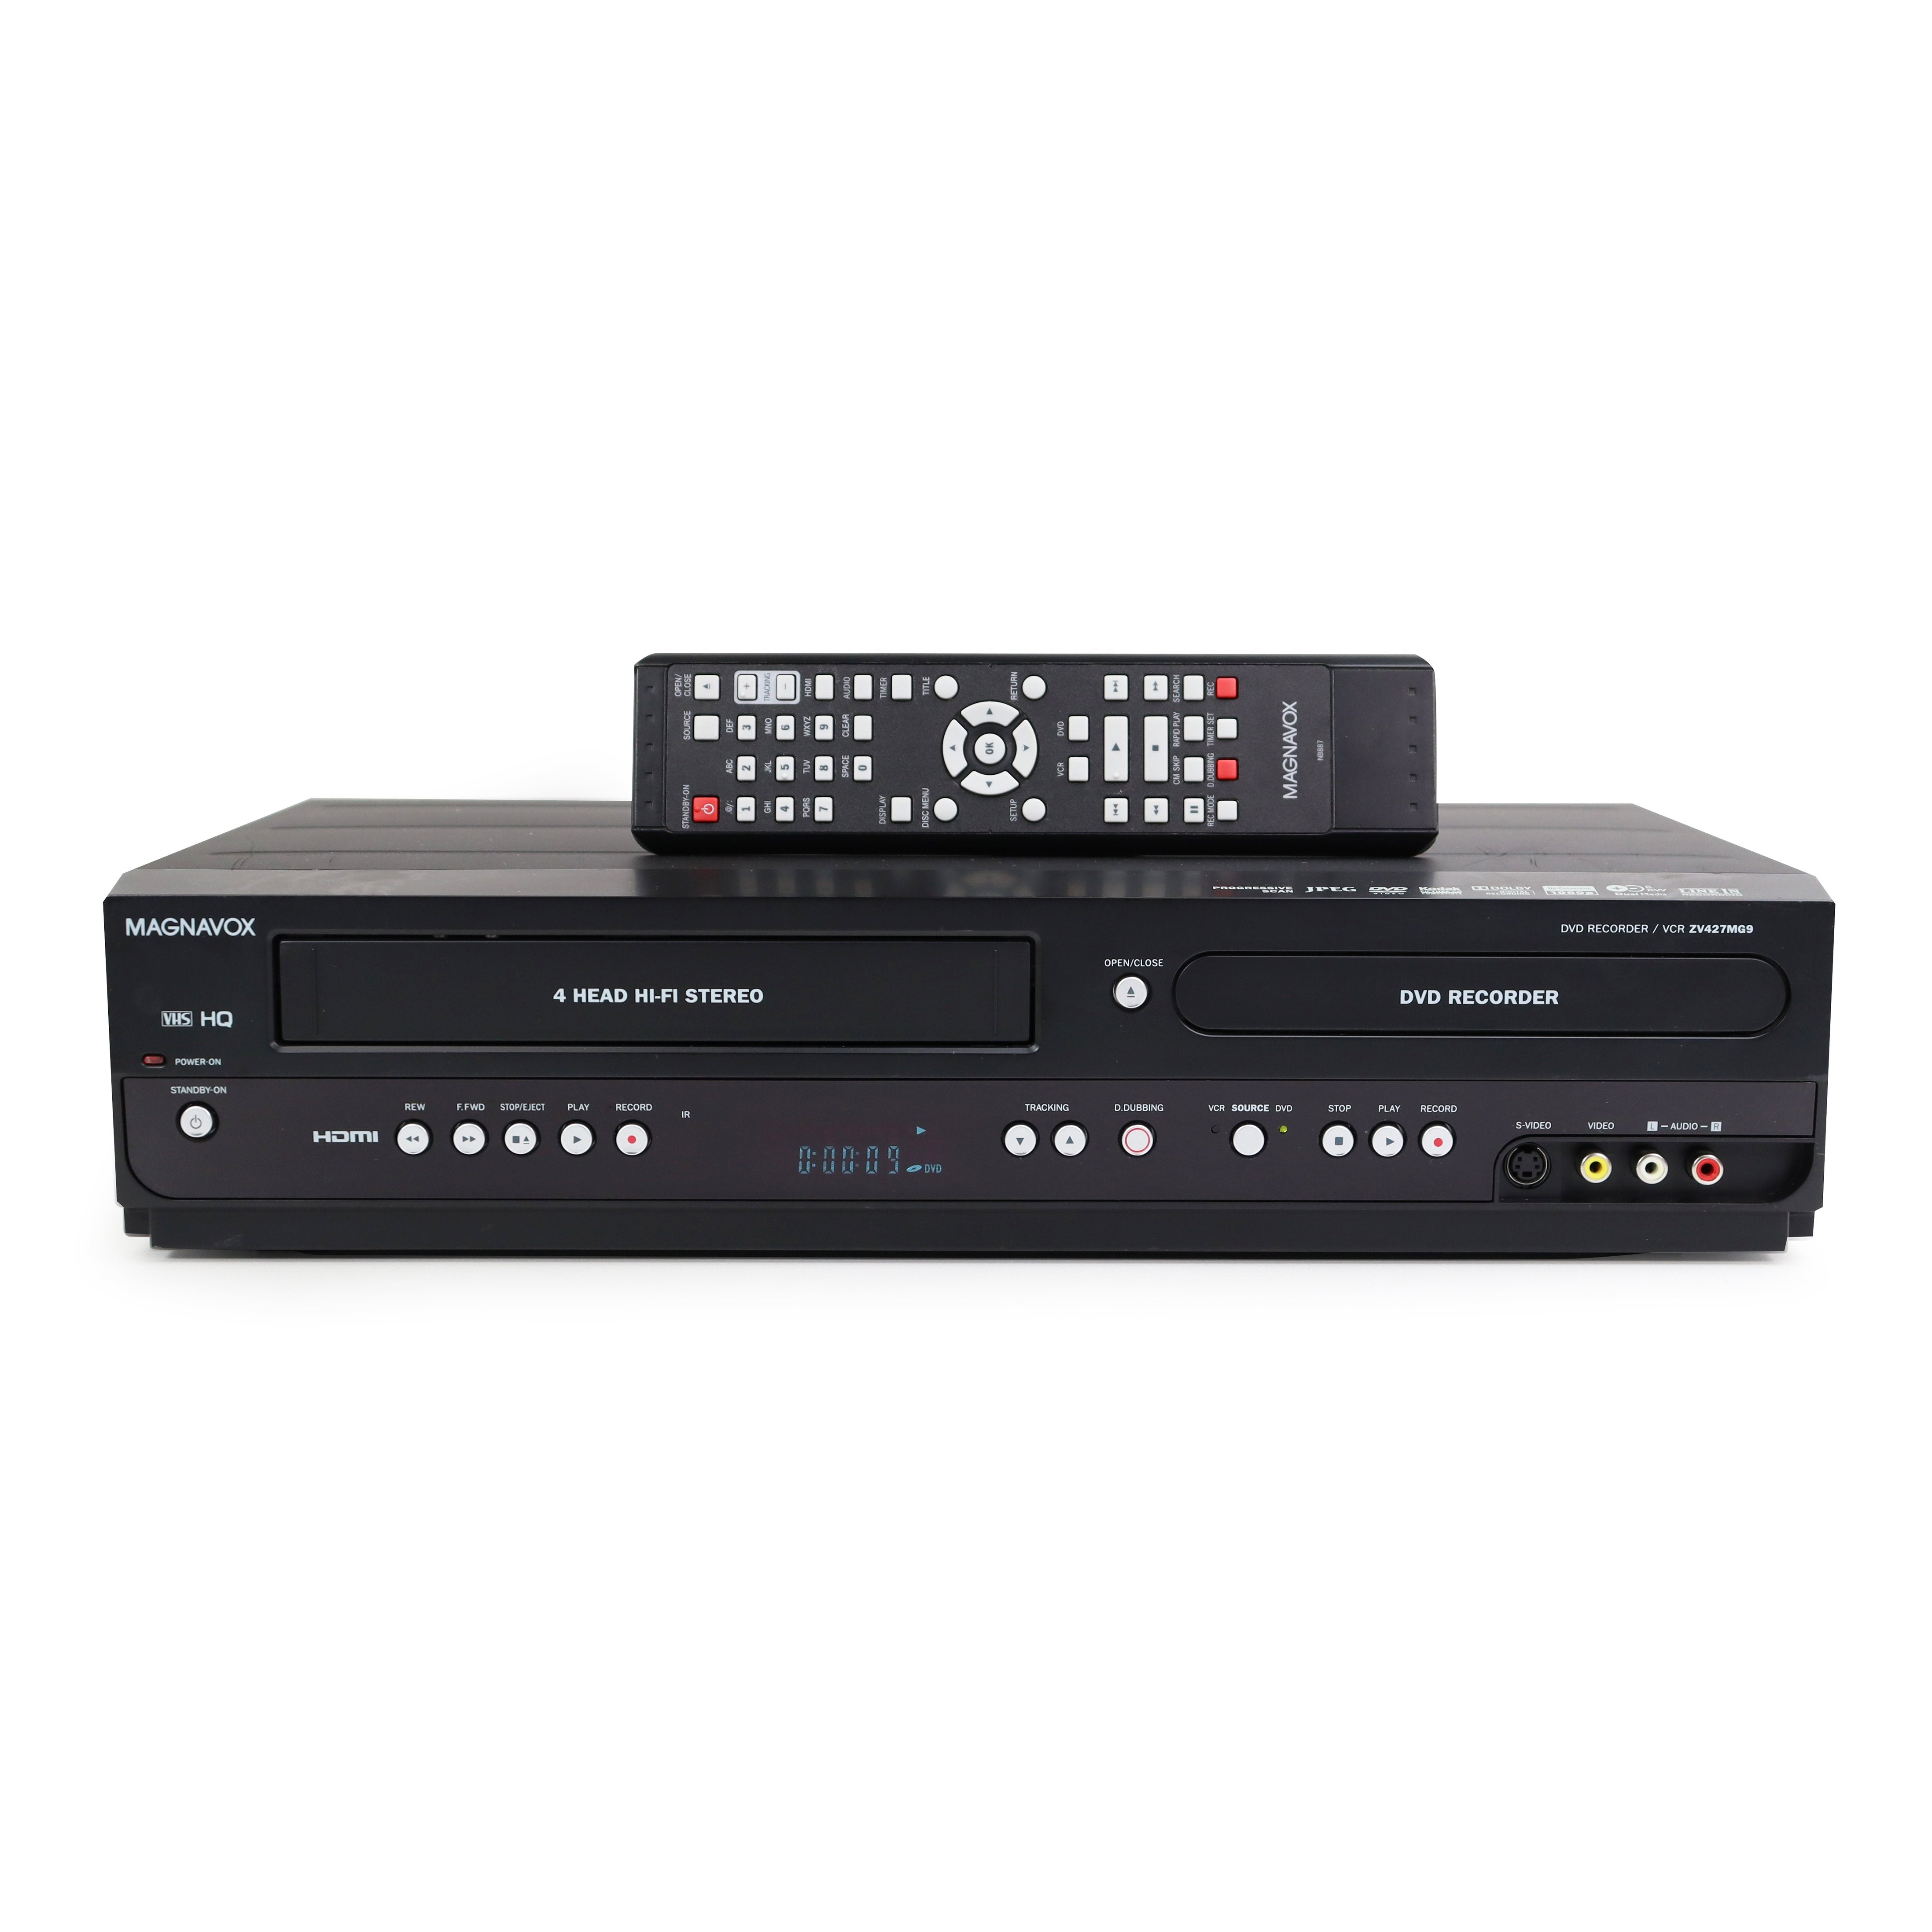 VHS / DVD Combi Recorders Archives